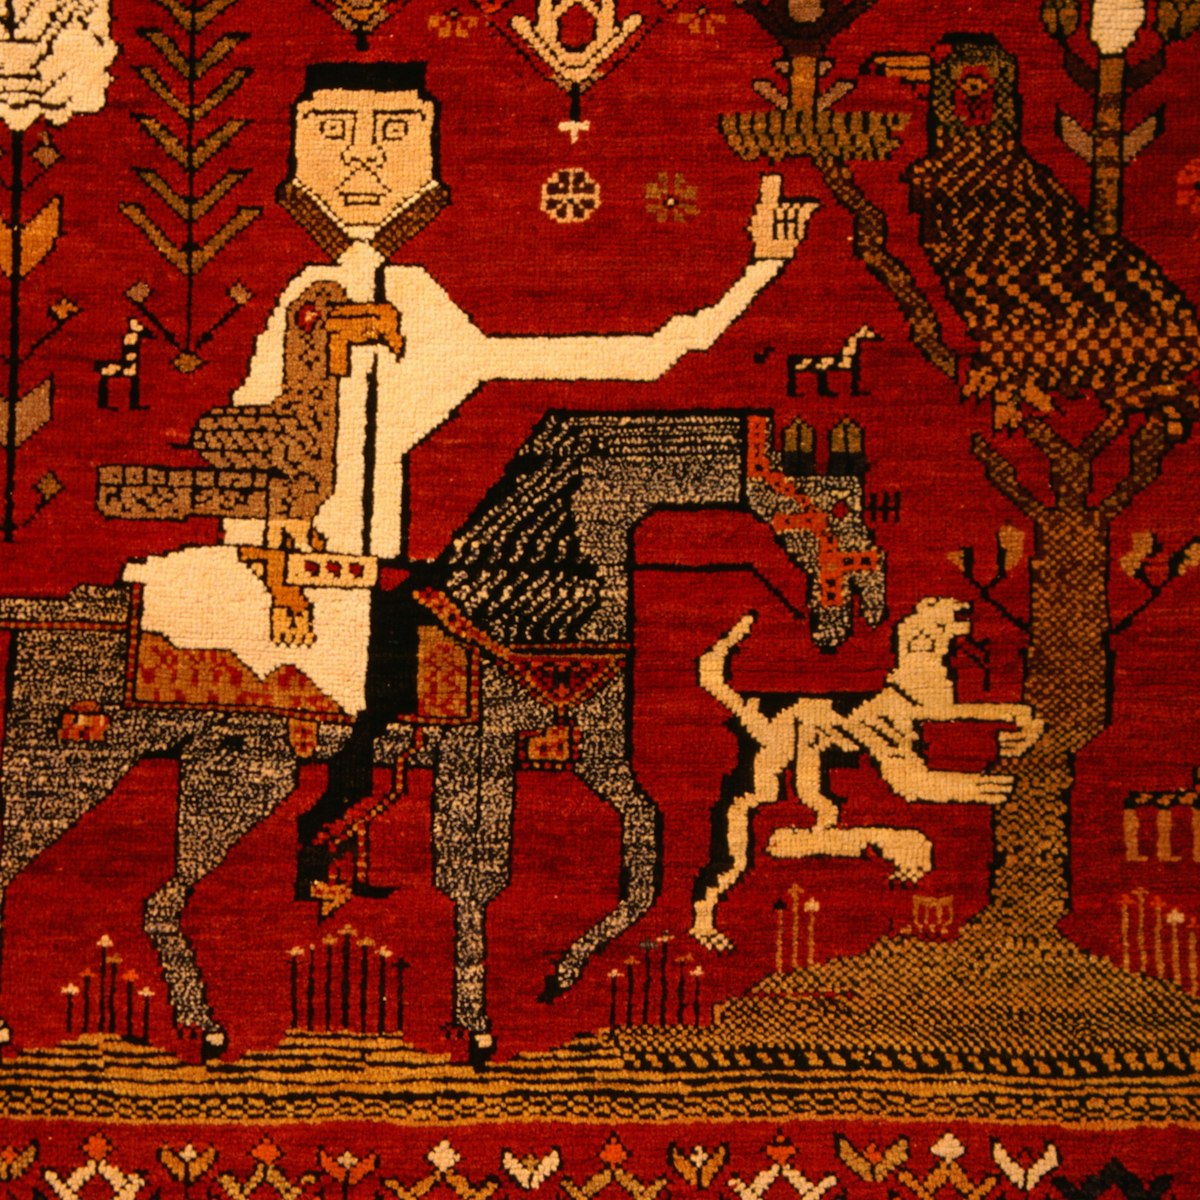 Detail of antique carpet on display at Textile Museum of Canada.